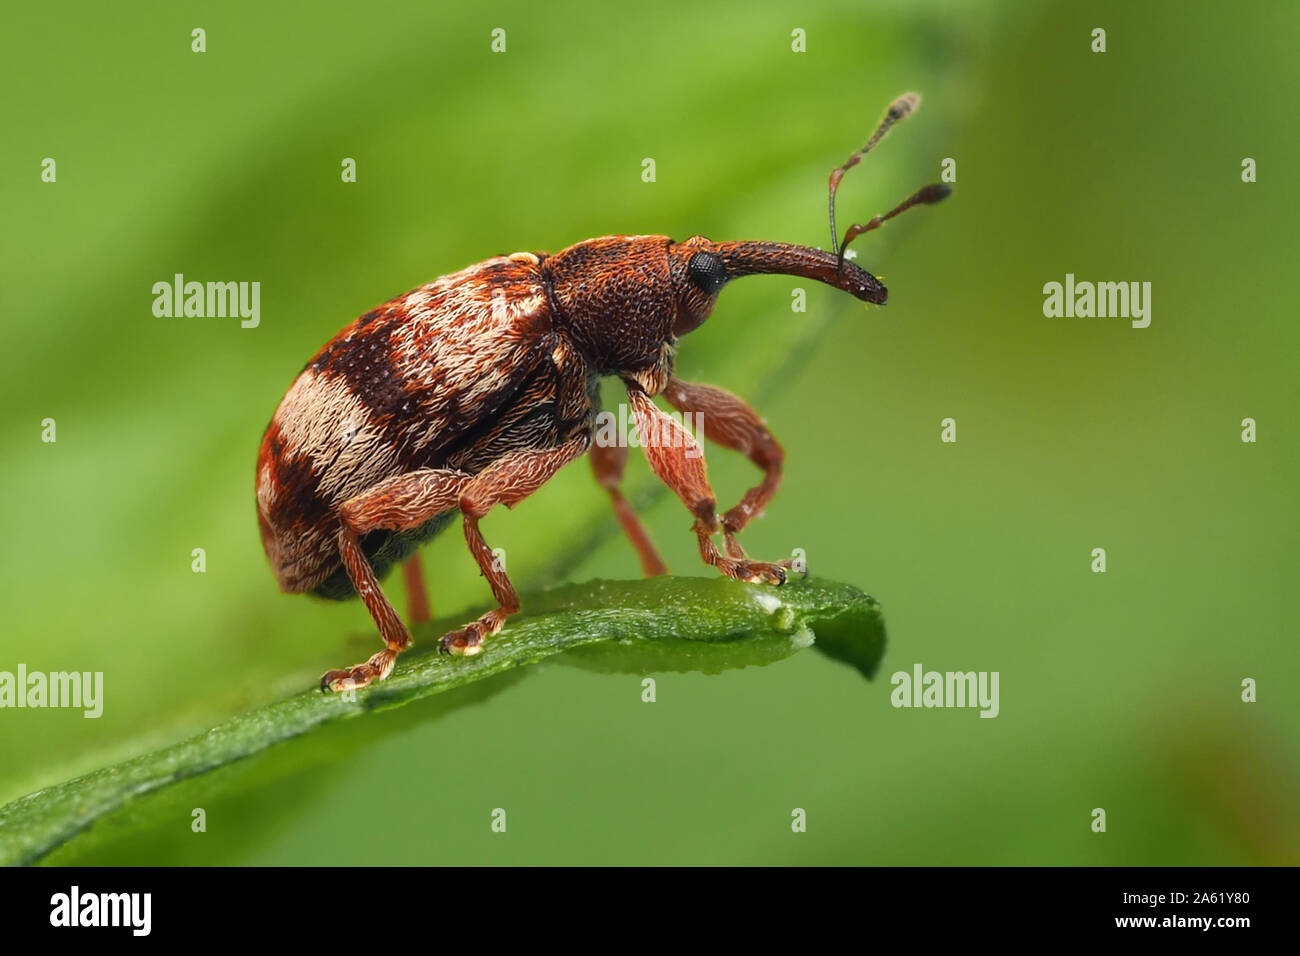 Anthonomus pedicularius weevil perched on hawthorn leaf. Tipperary, Ireland Stock Photo